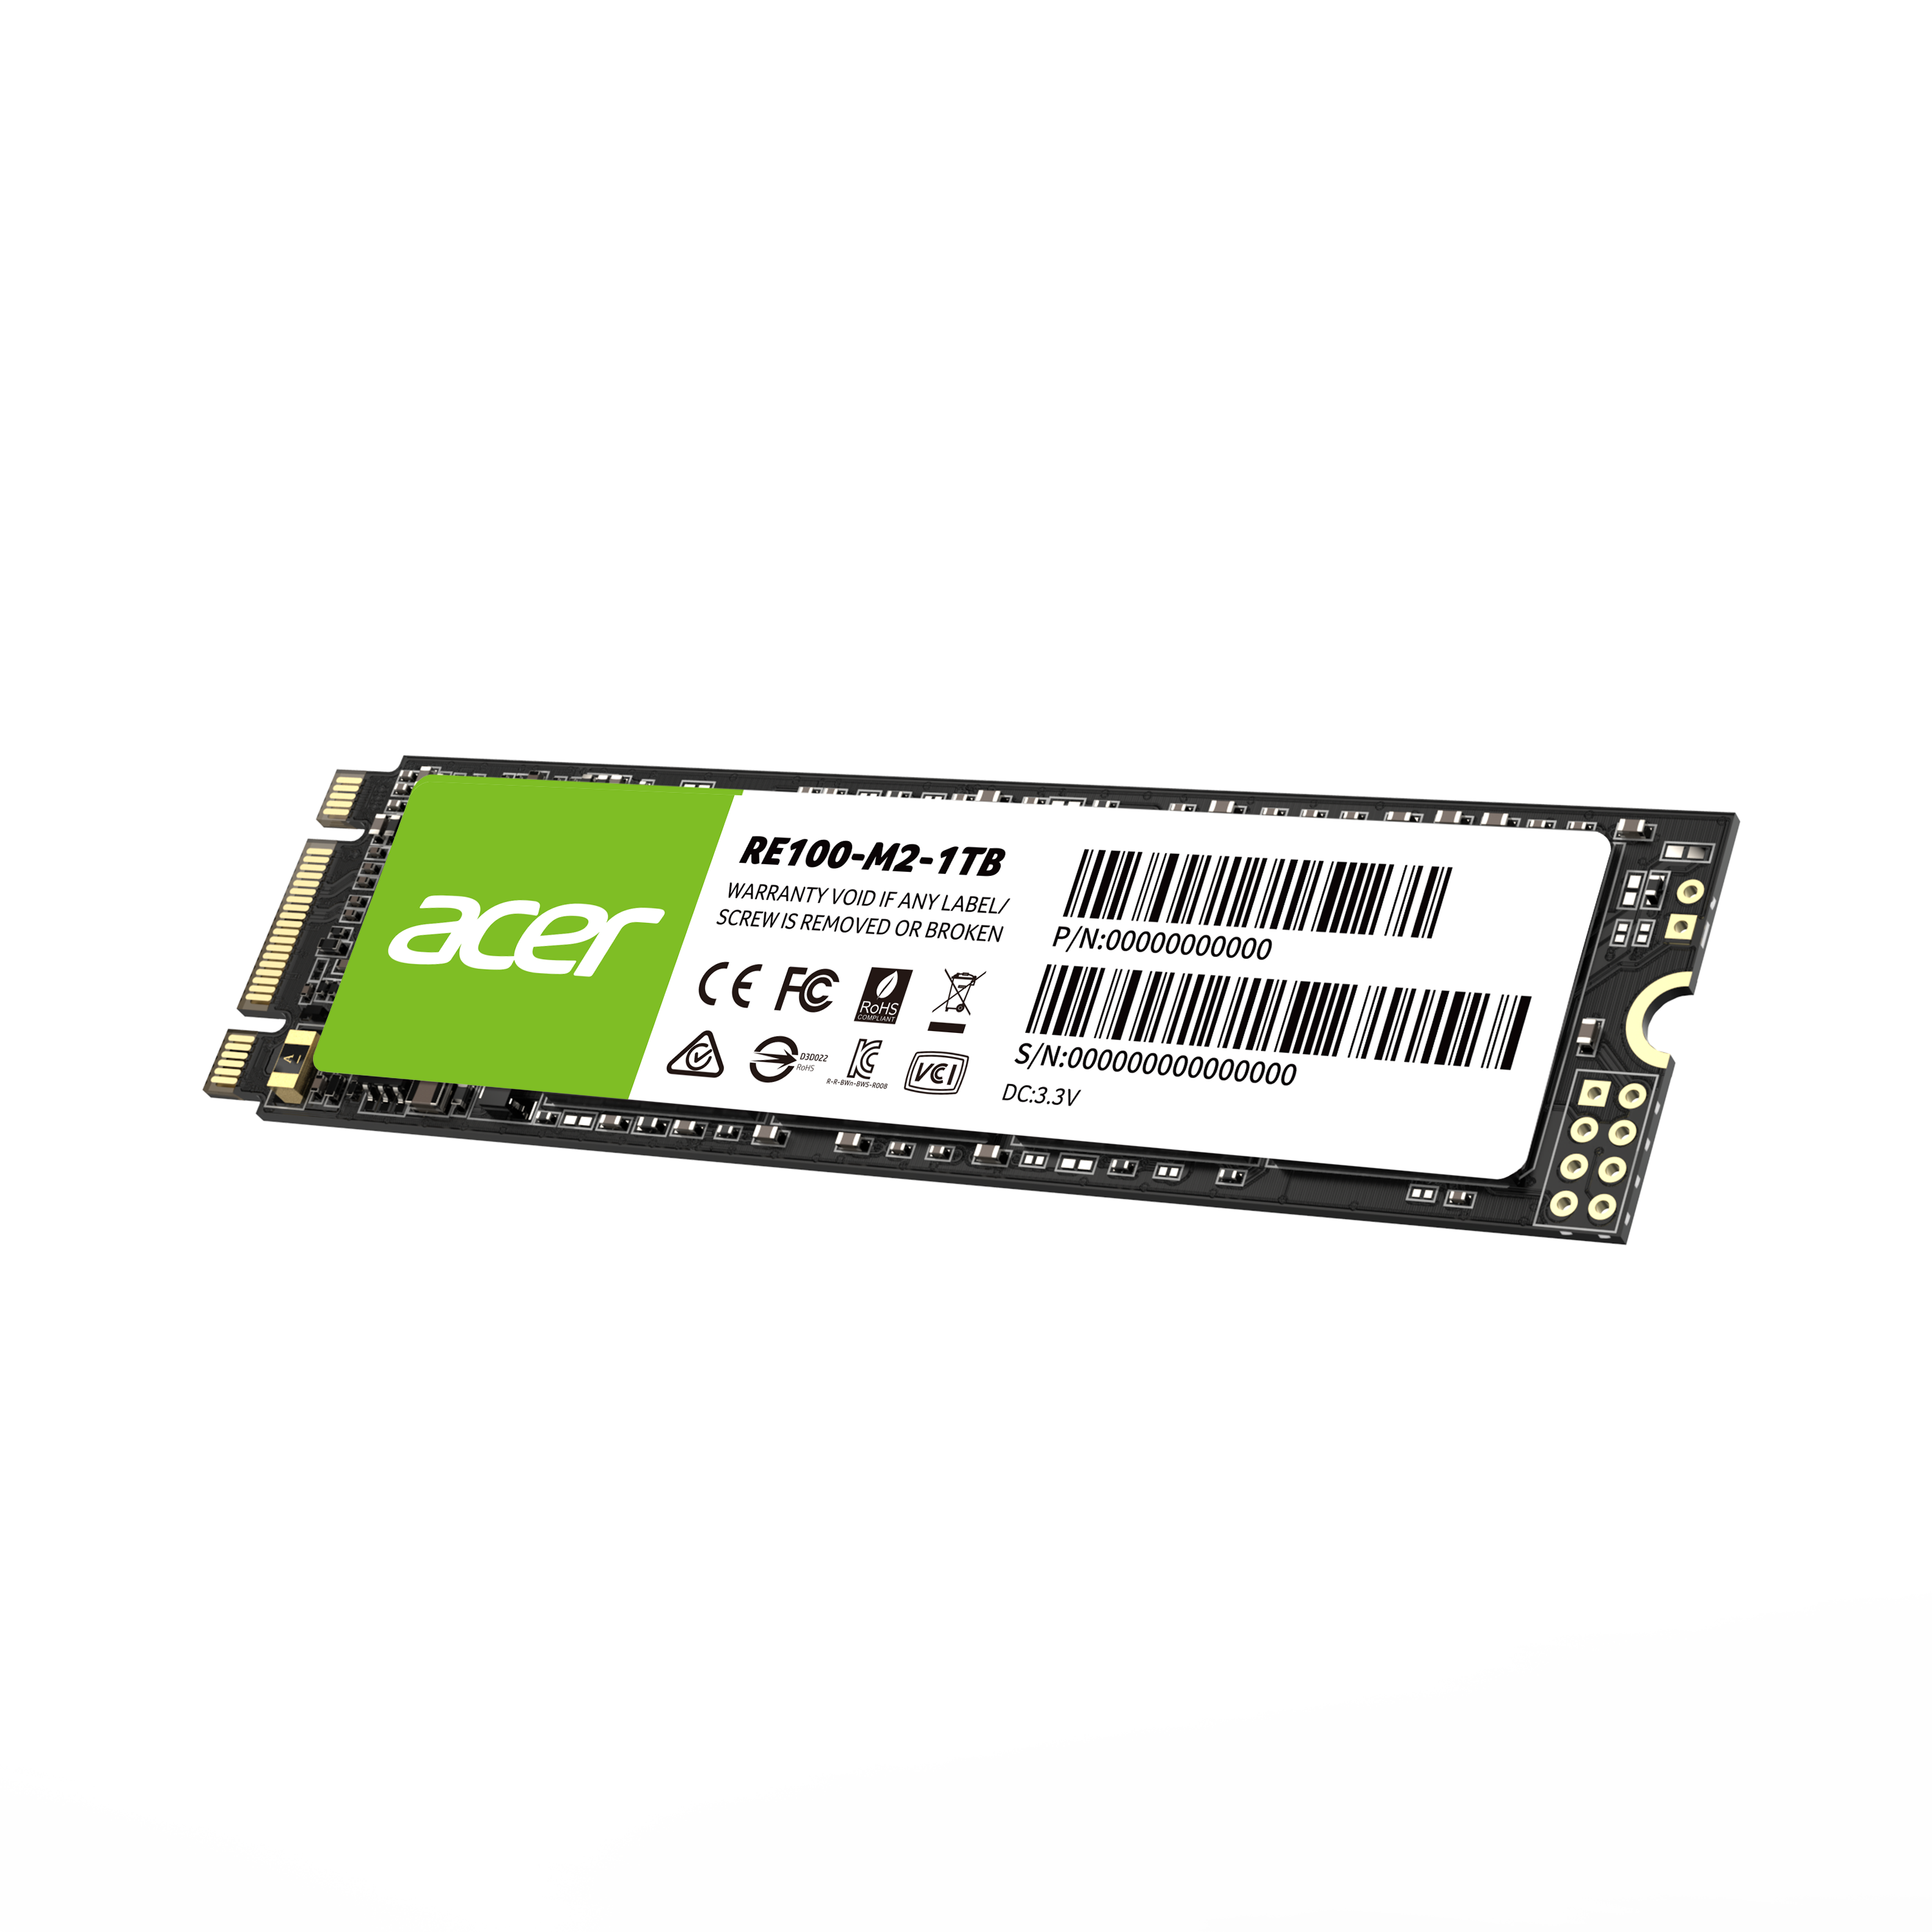 Acer RE100 M.2 SATA SSD for faster and writing